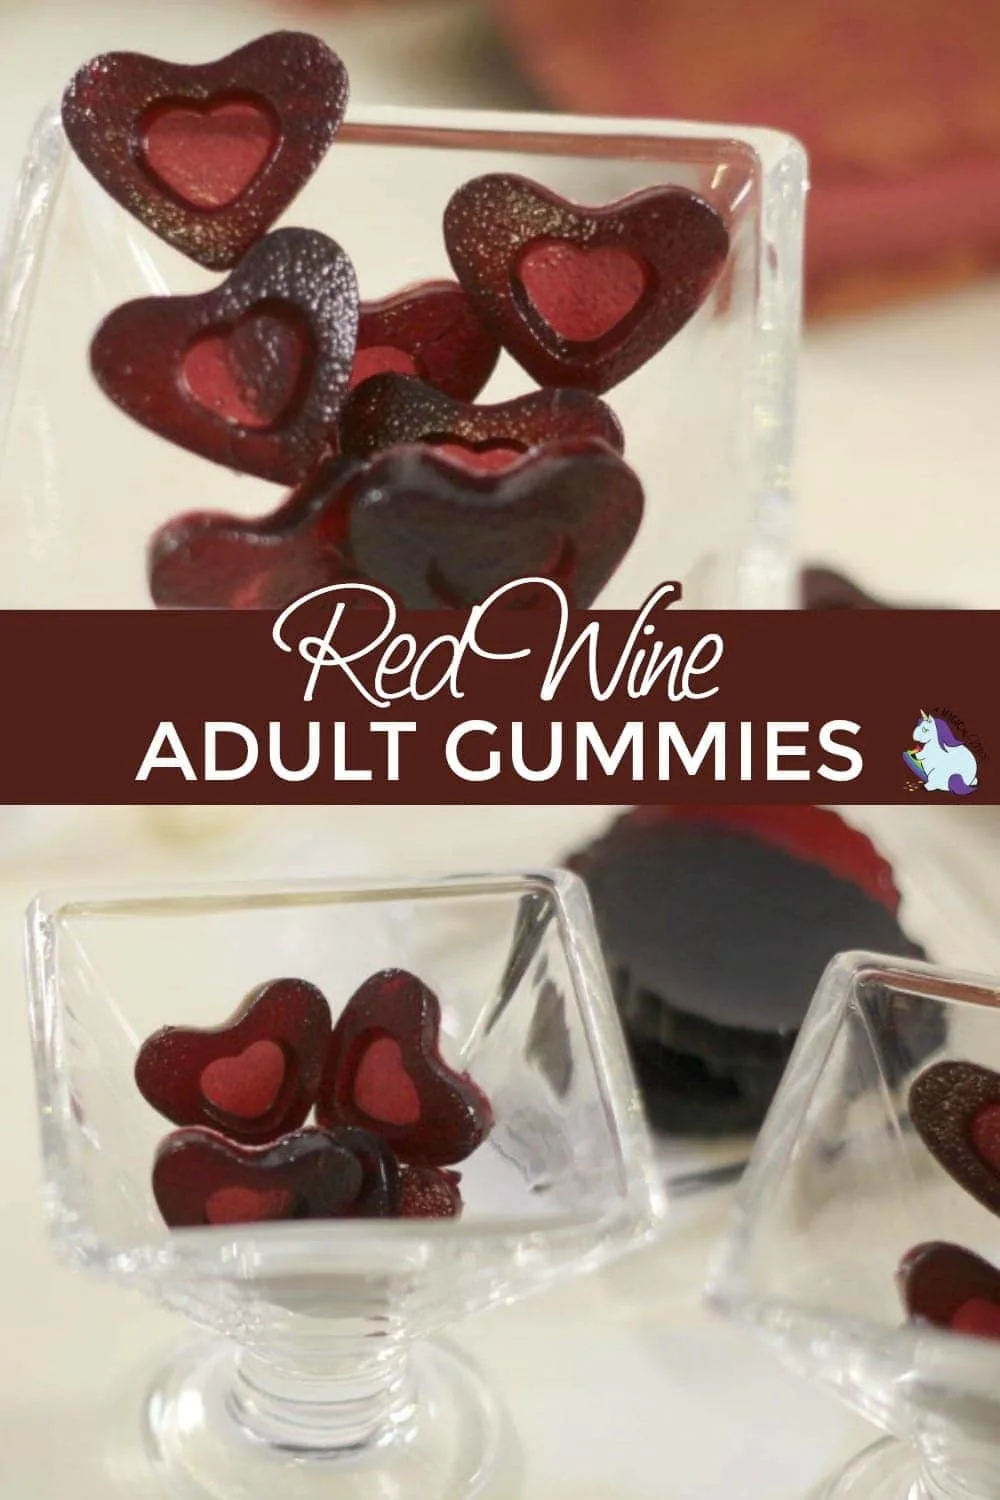 heart gummies in decorative dishes